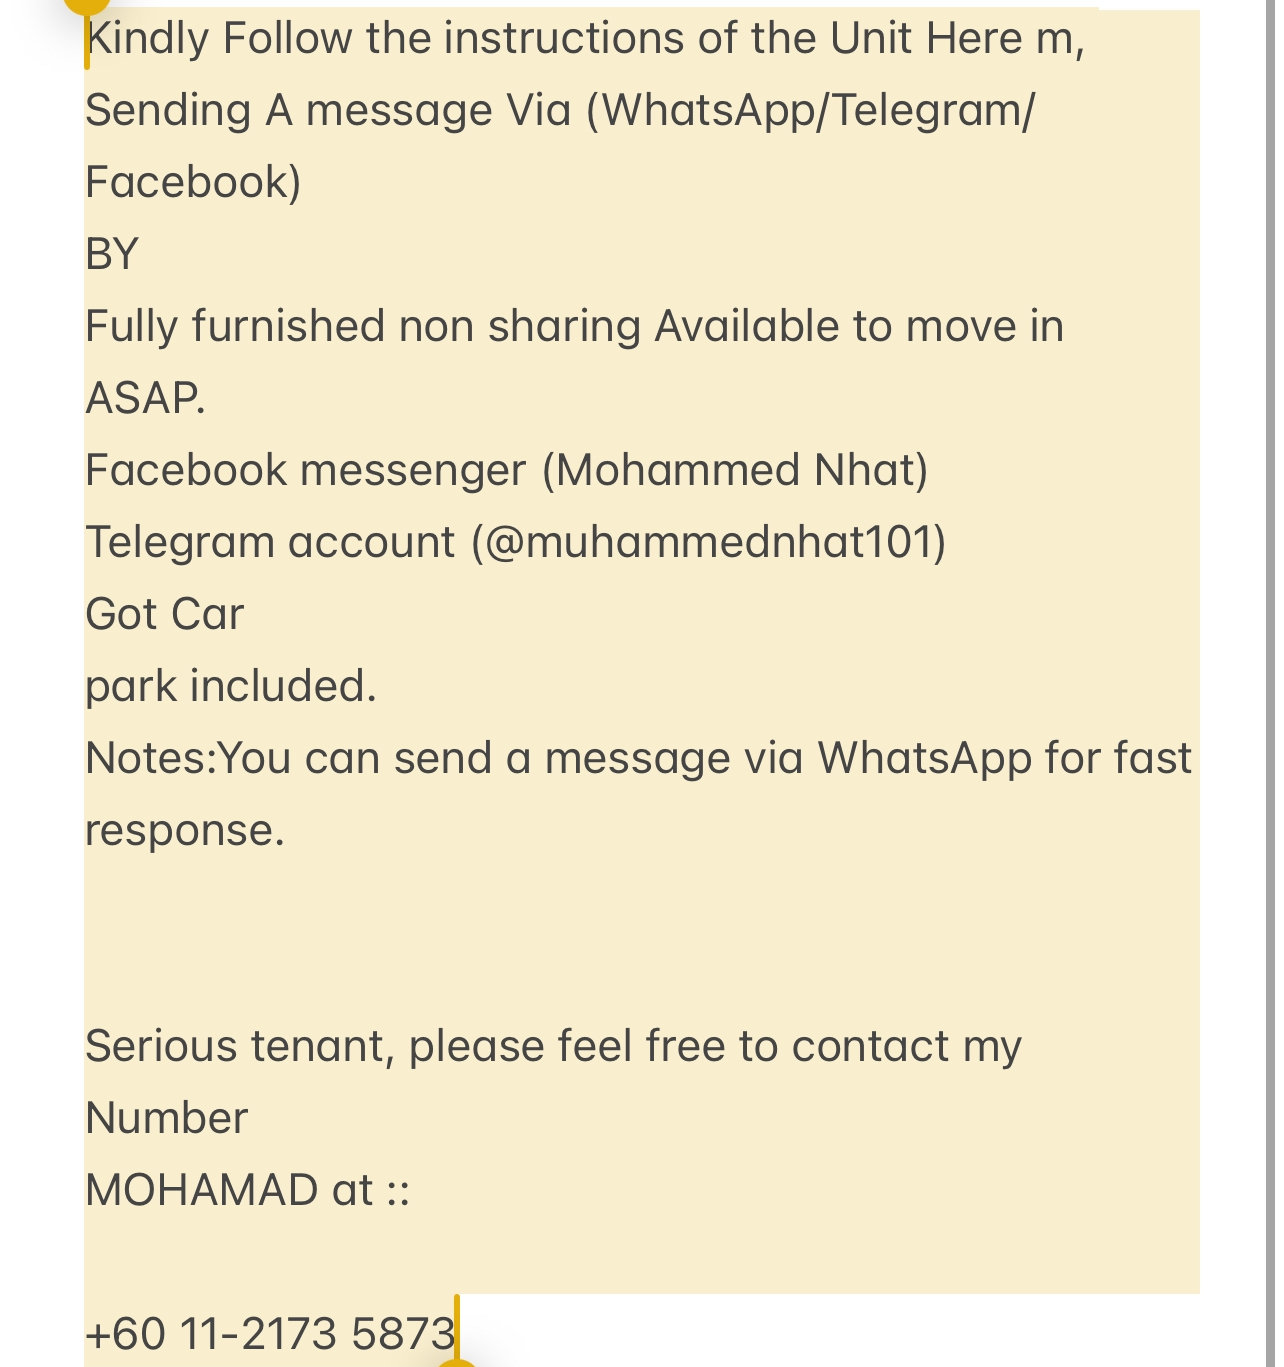 room for rent, studio, jalan kundang 1, Send the owner a message on WhatsApp/facebook if you want to RENT the unit facebook (Mohammed Nhat)&Telegram(@muhammednhat101) Fully furnished non sharing :(comfortable)